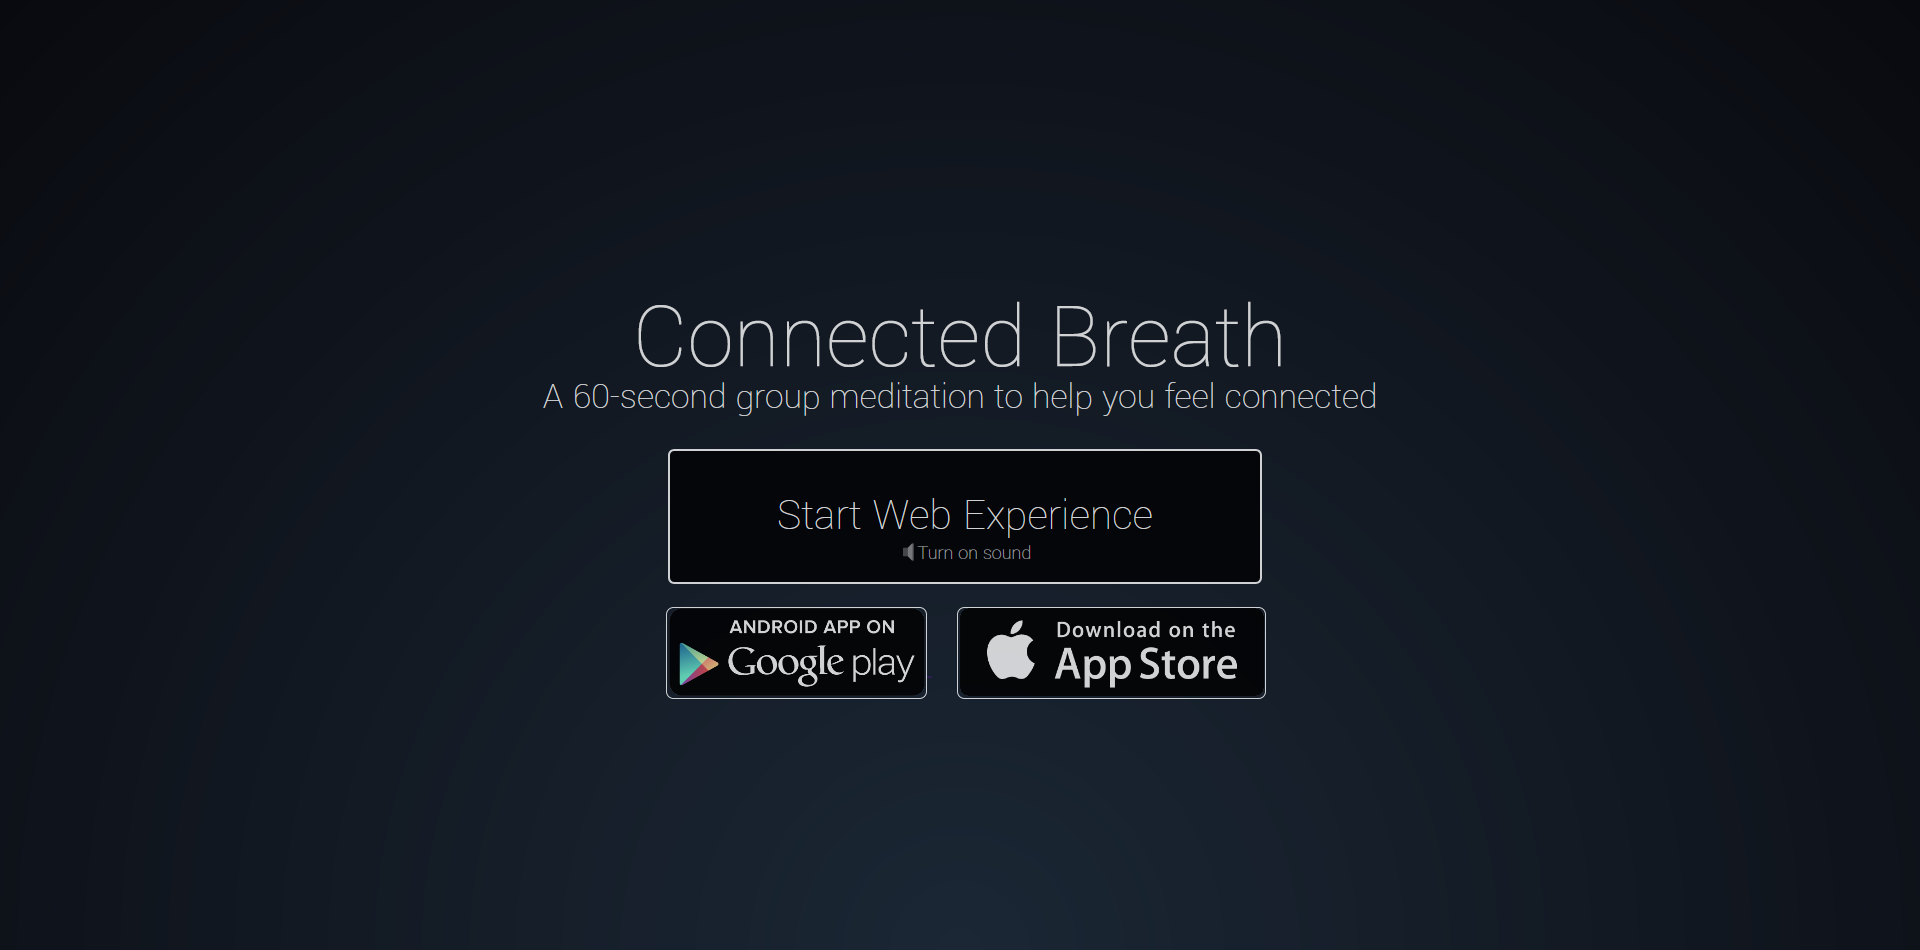 Find detailed information about Connected Breath